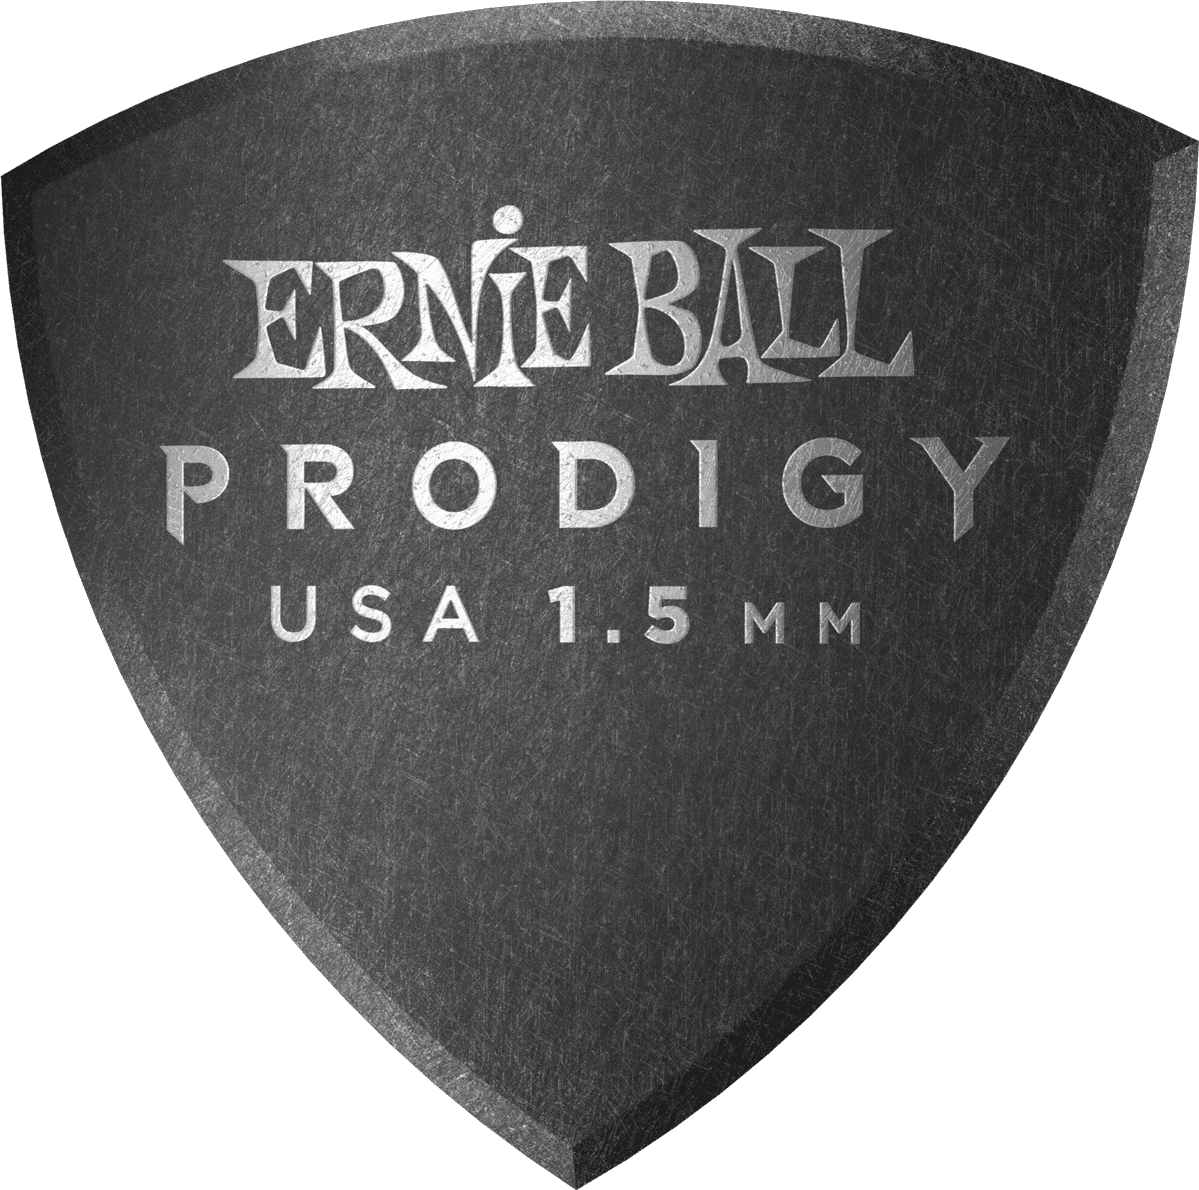 Ernie Ball Prodigy Shield Large 1,5mm (x6 Pack) - Guitar pick - Main picture